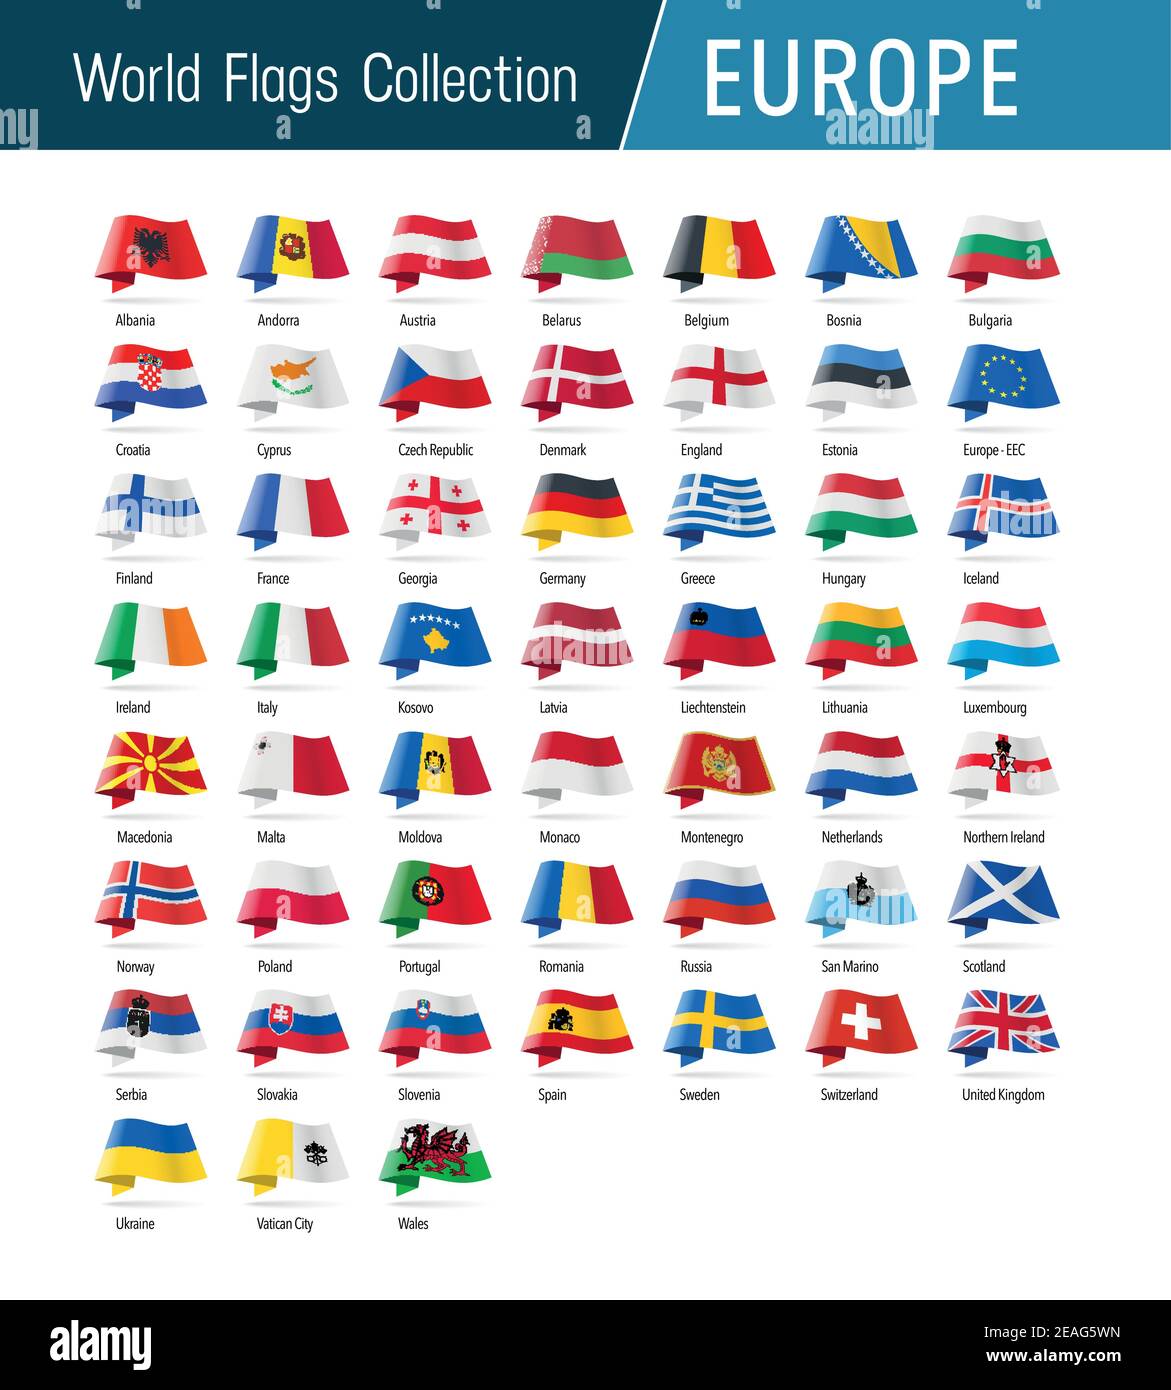 Flags of Europe, waving in the wind. Icons pointing location, origin, language. Vector world flags collection. Stock Vector